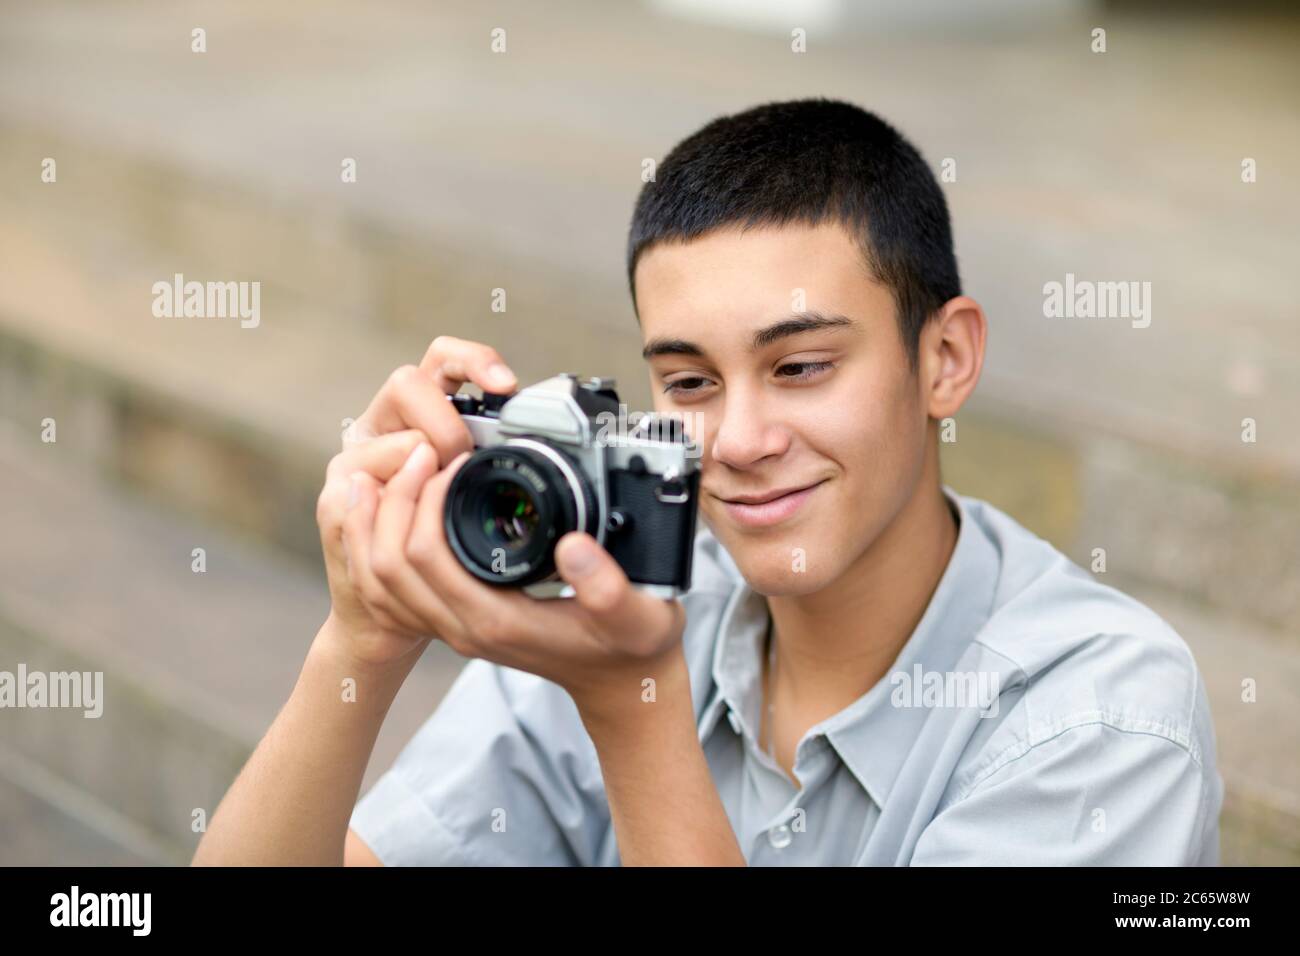 Young teenage boy holding a vintage camera as he checks out his shot on the rear screen with a pleased smile in close up Stock Photo